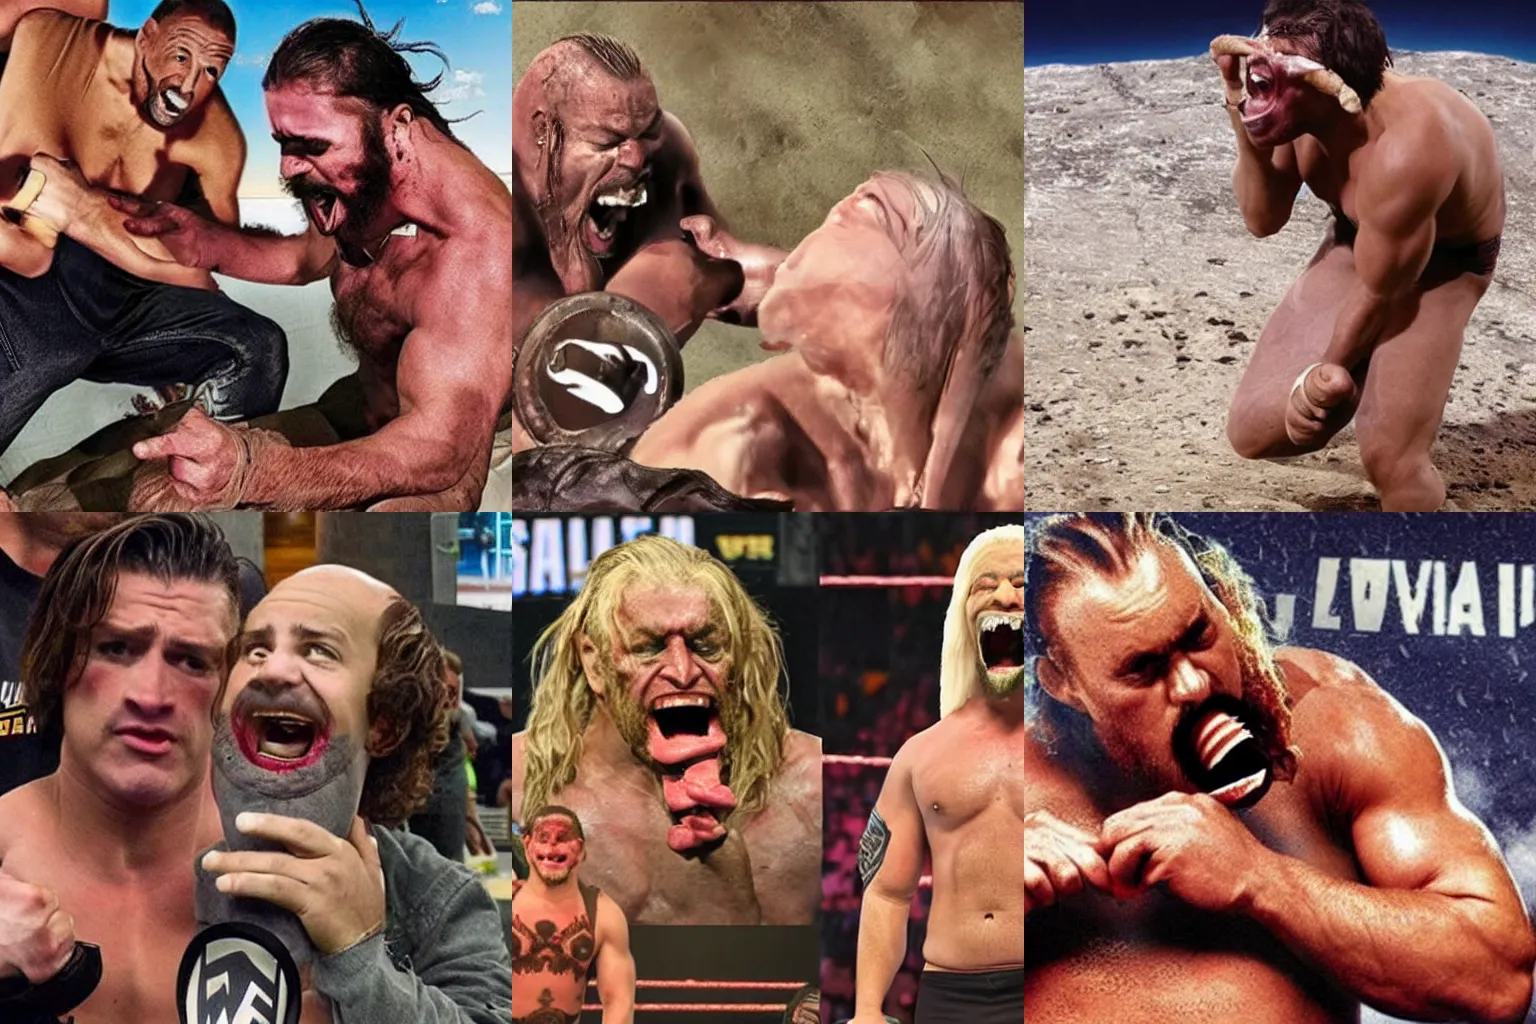 Prompt: viral promotional image, wwe wrestler devouring his sandal, reference to saturn devouring his son